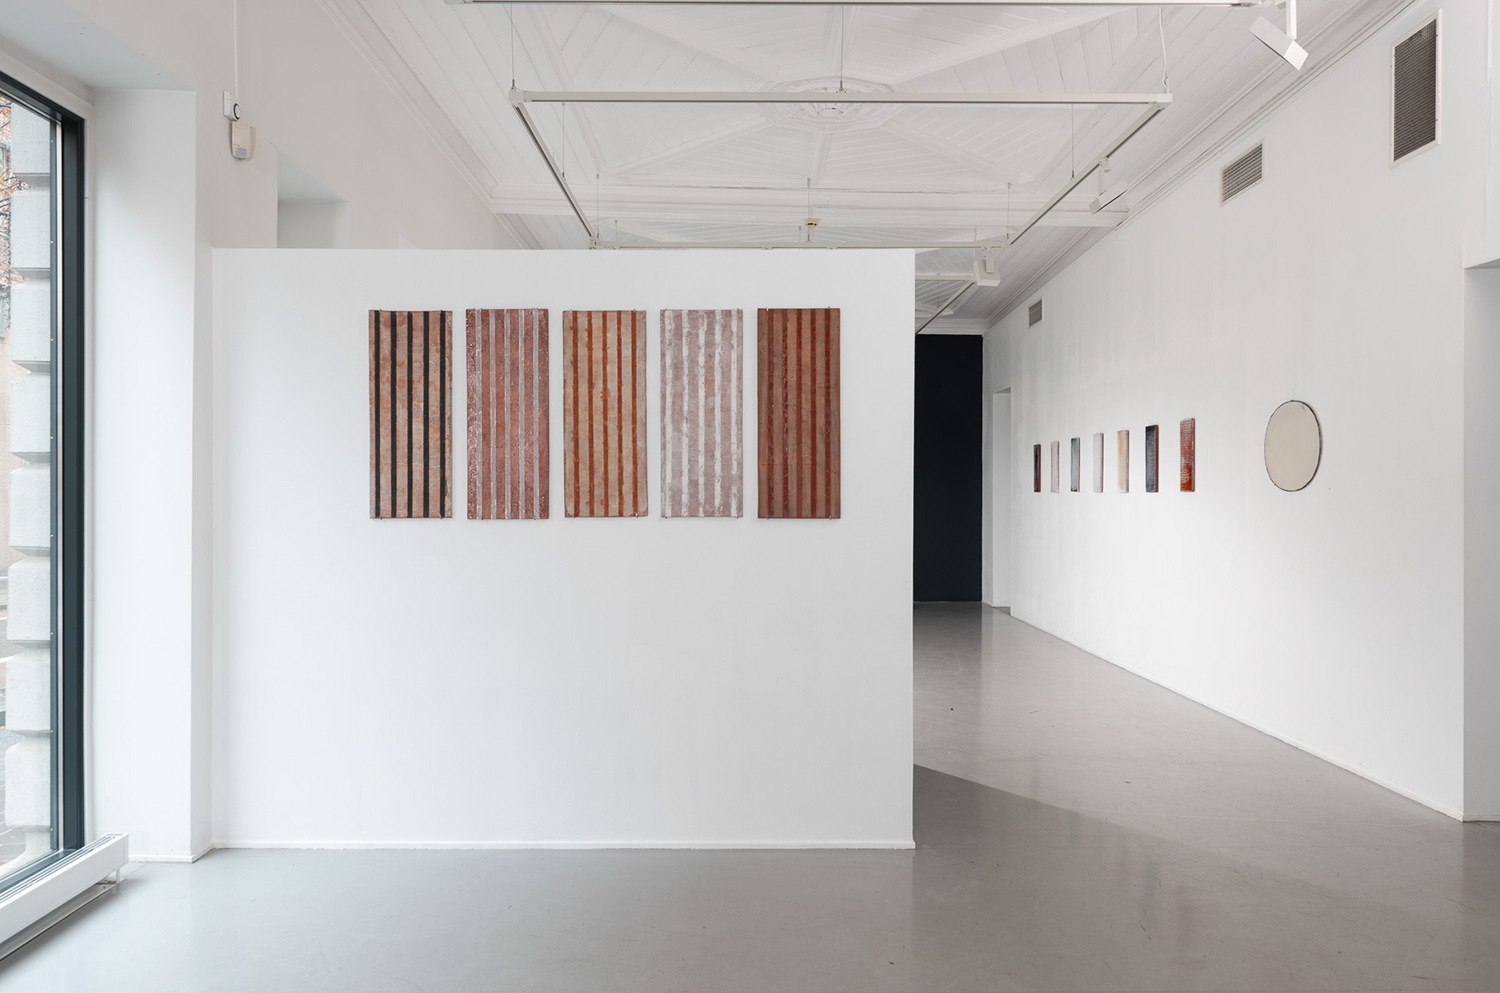 Malterud presents wall mounted ceramic pieces at Format